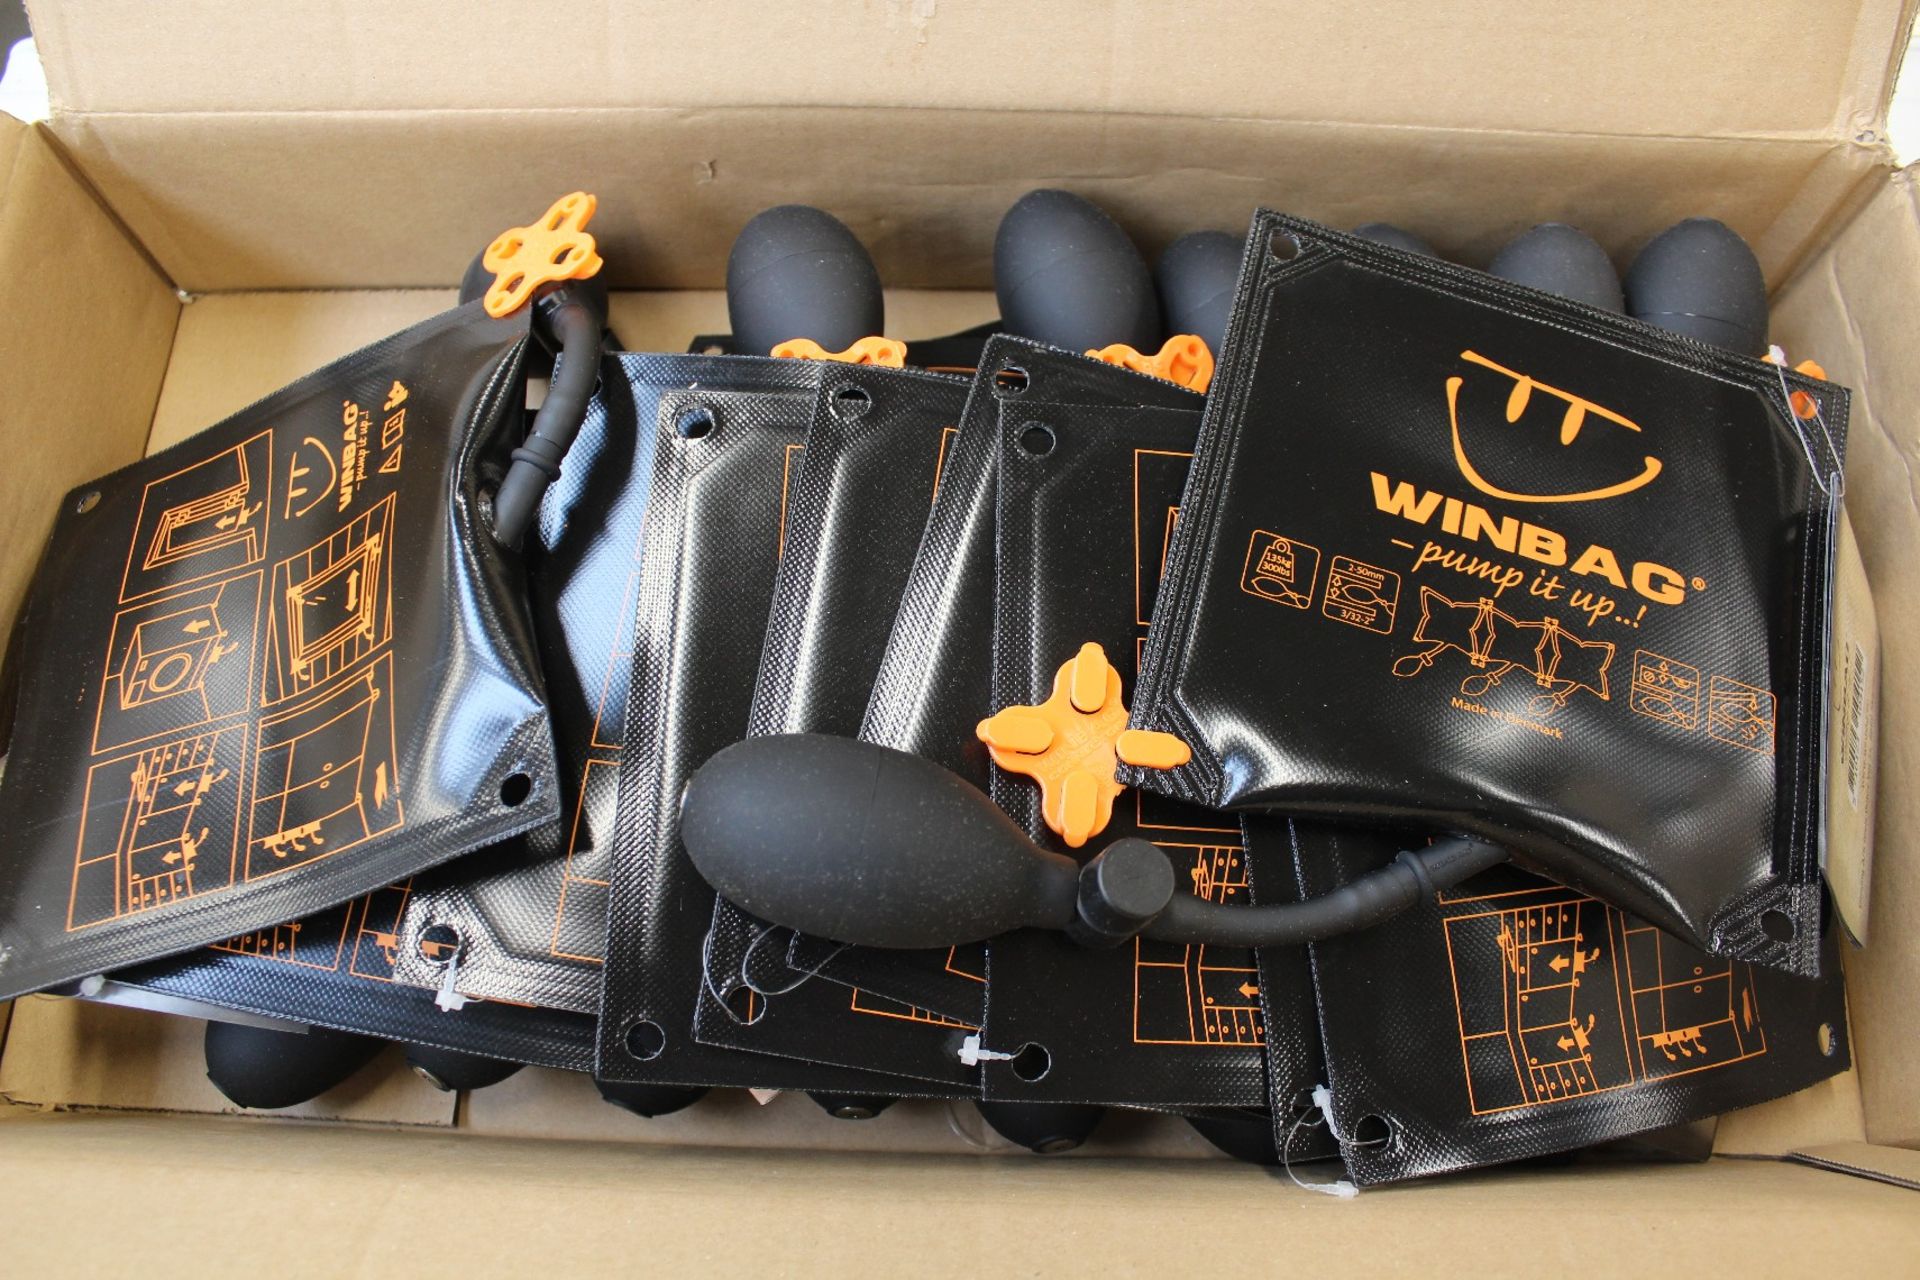 Twenty as new Winbag Connect inflatable air wedges (1000lb/450kg).